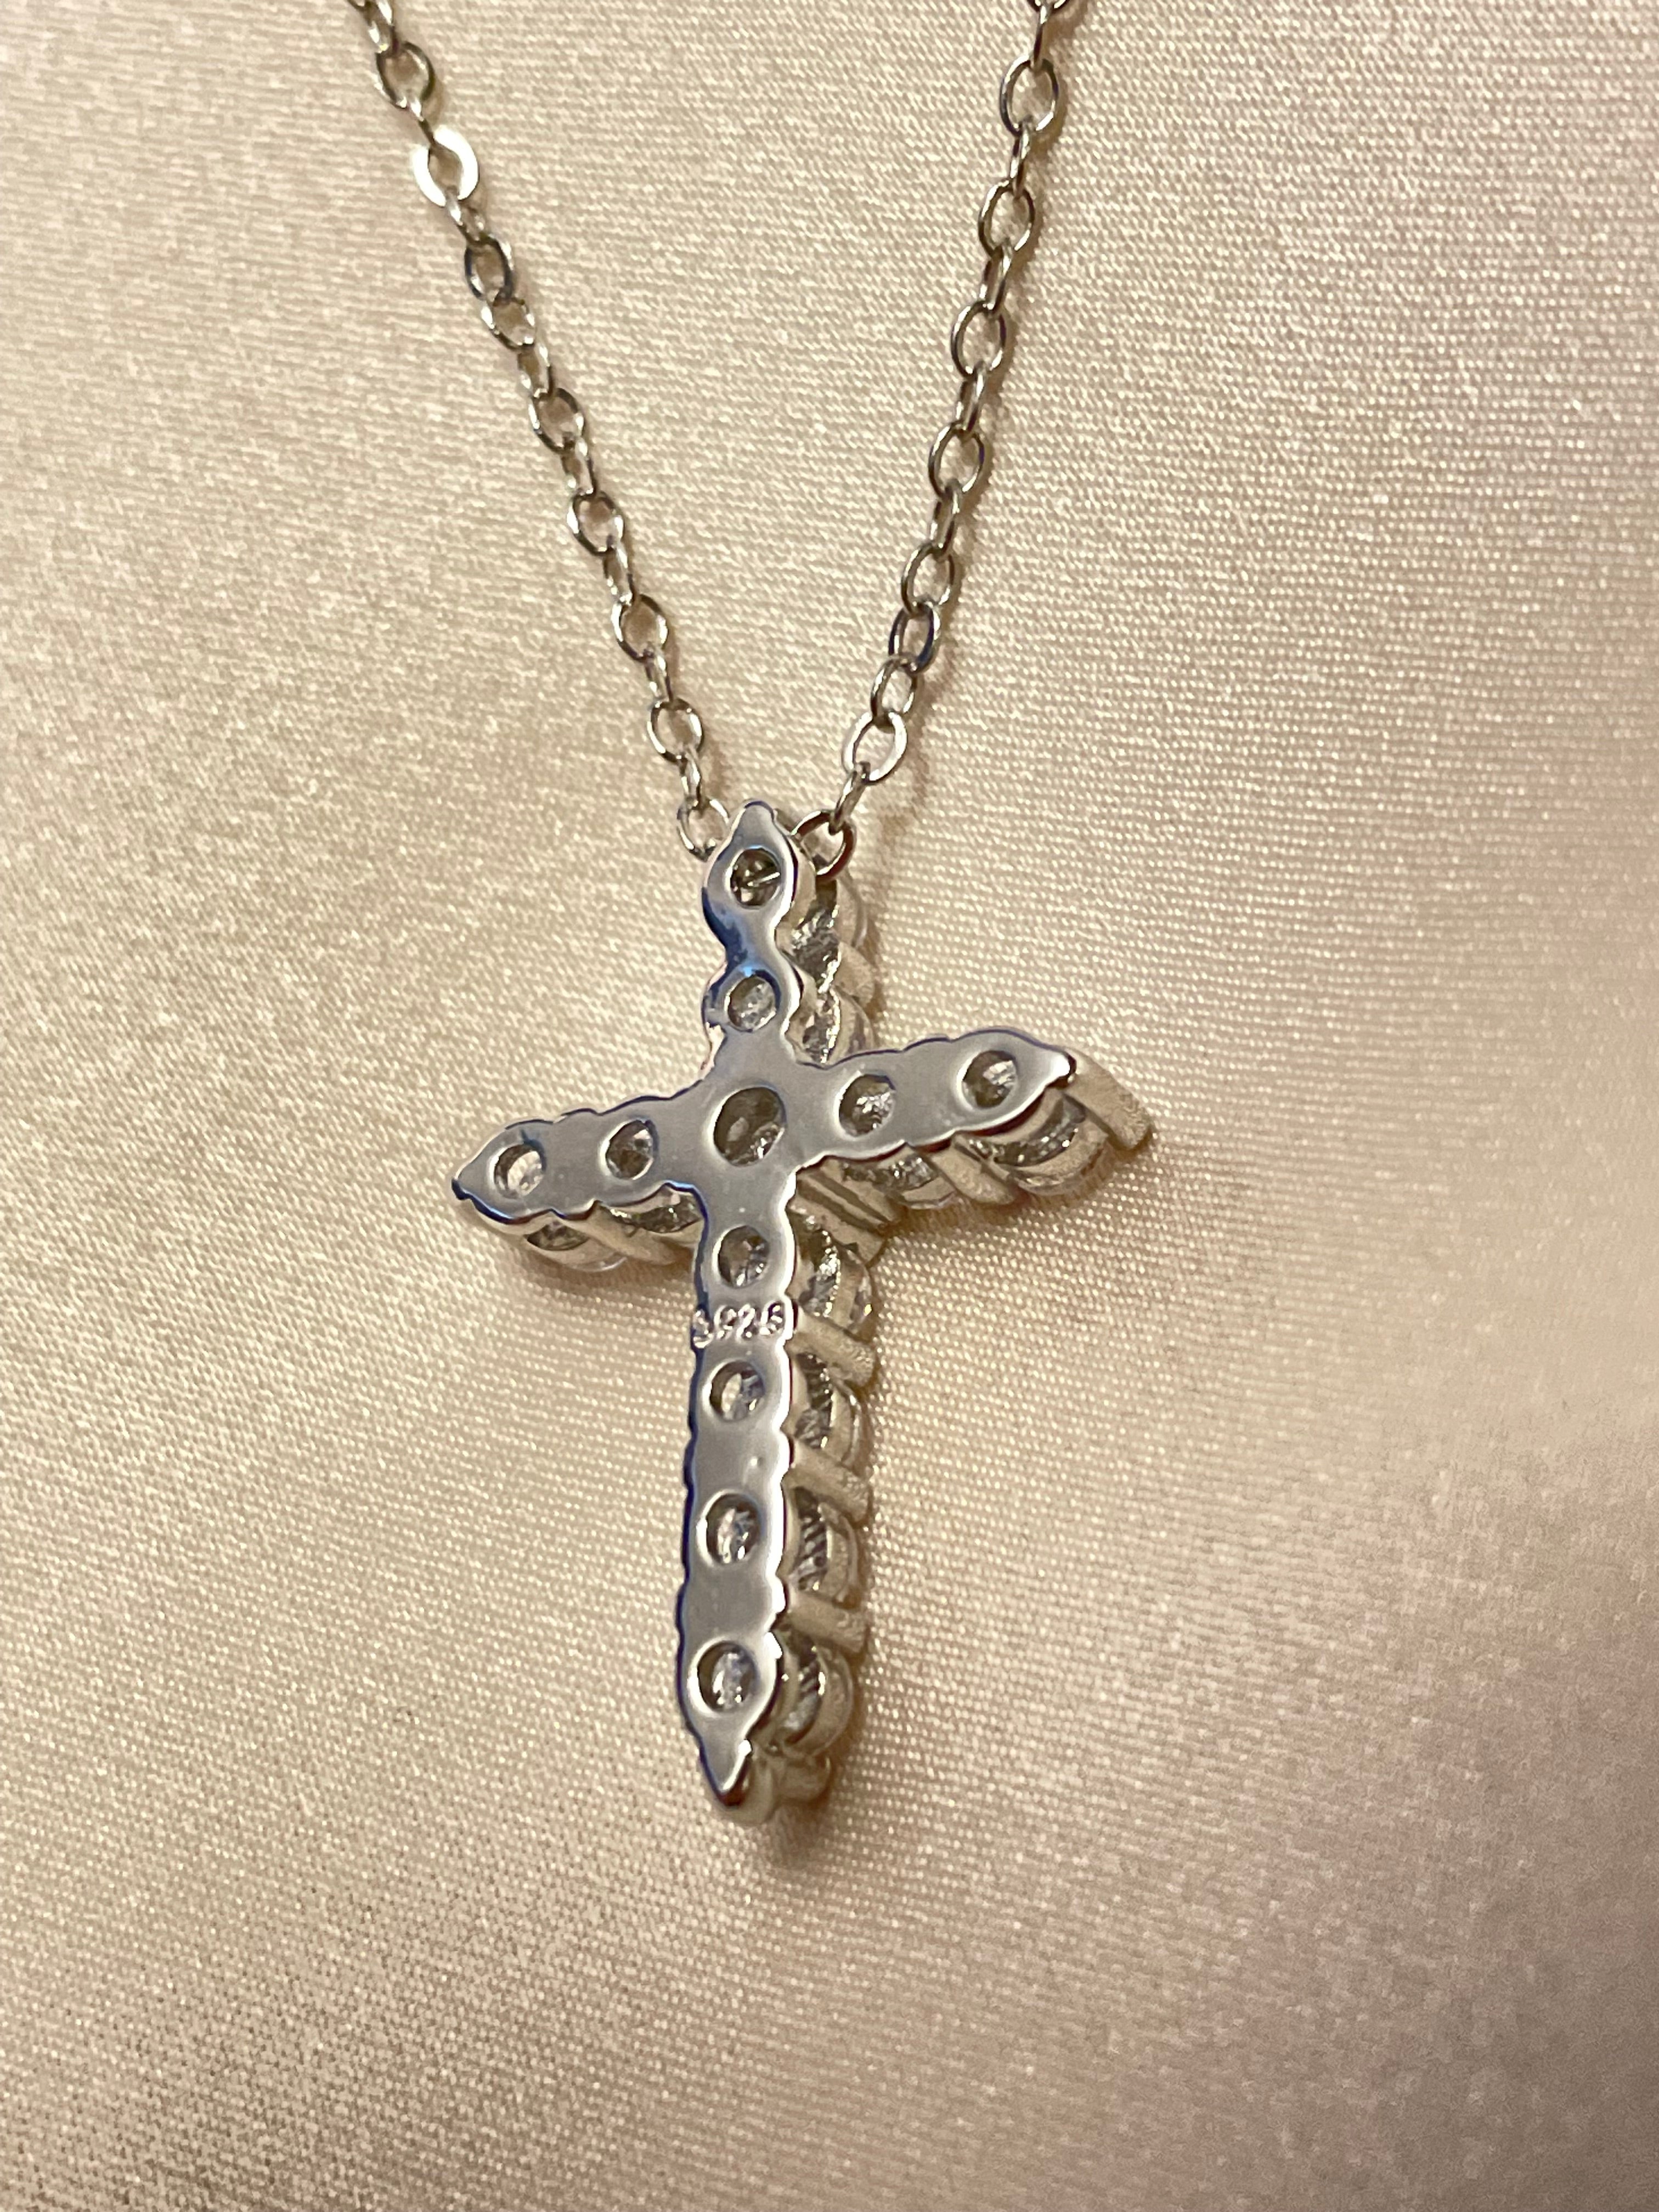 Buy Miabella 925 Sterling Silver Italian Hammered Cross Pendant Necklace  for Women Men 18 Inch Chain, Sterling Silver or 18K Yellow Gold Over Silver  (Sterling-Silver) at Amazon.in